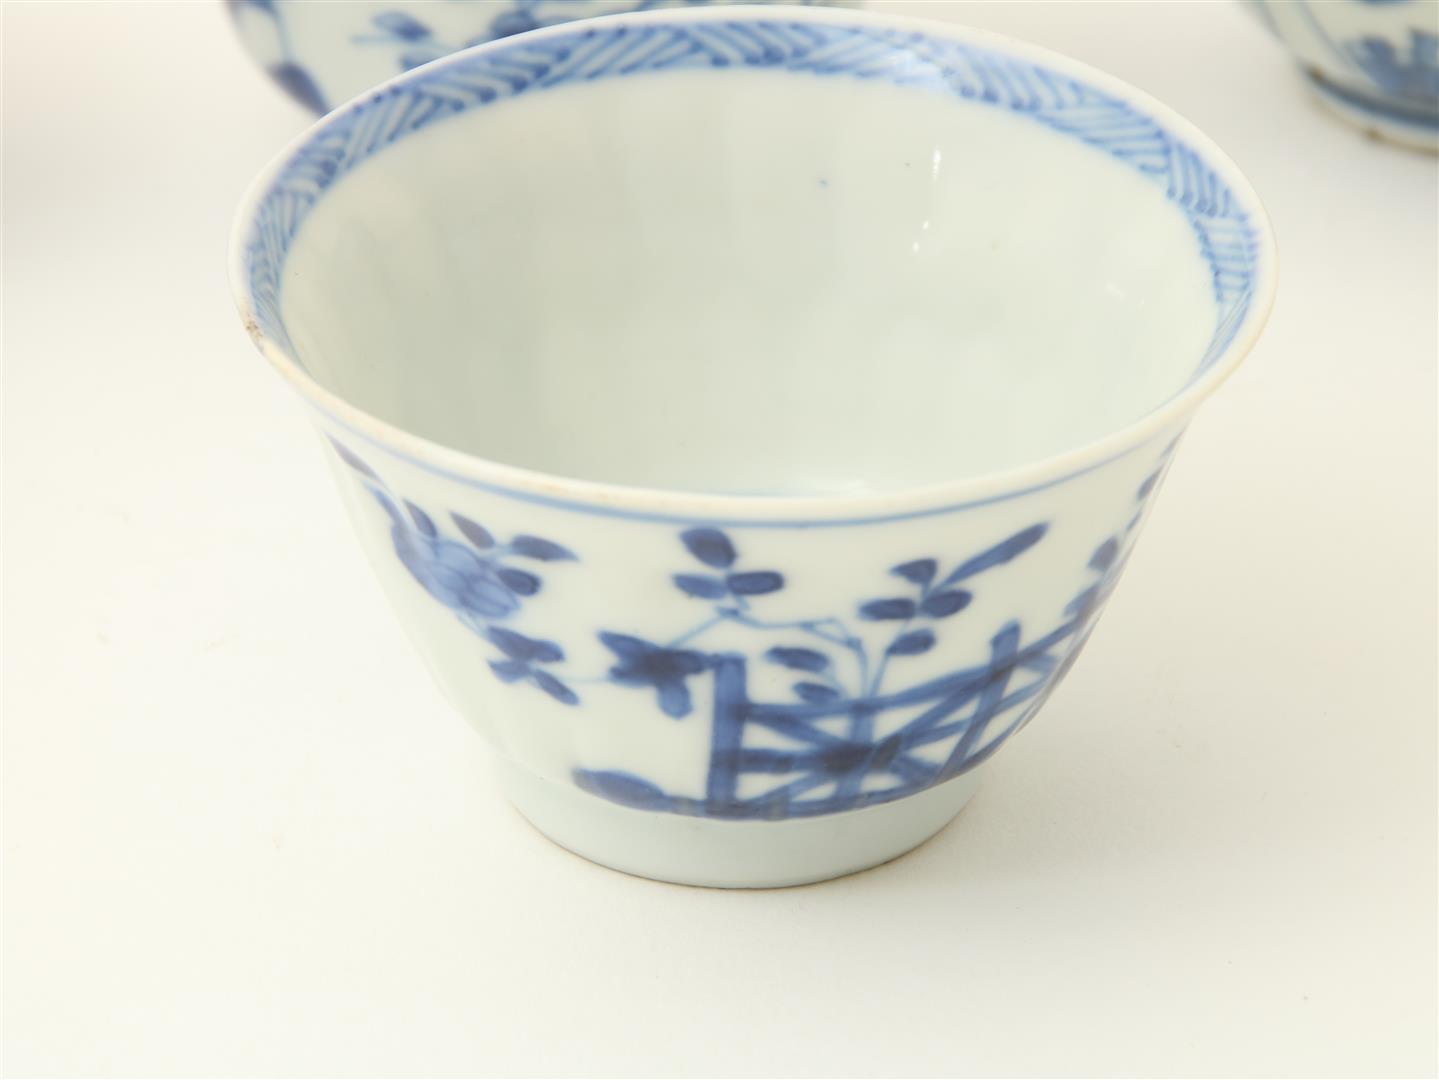 Series of 3 porcelain Kangxi cups with flower decoration and marked with Lozenge mark, including 5 - Image 2 of 6